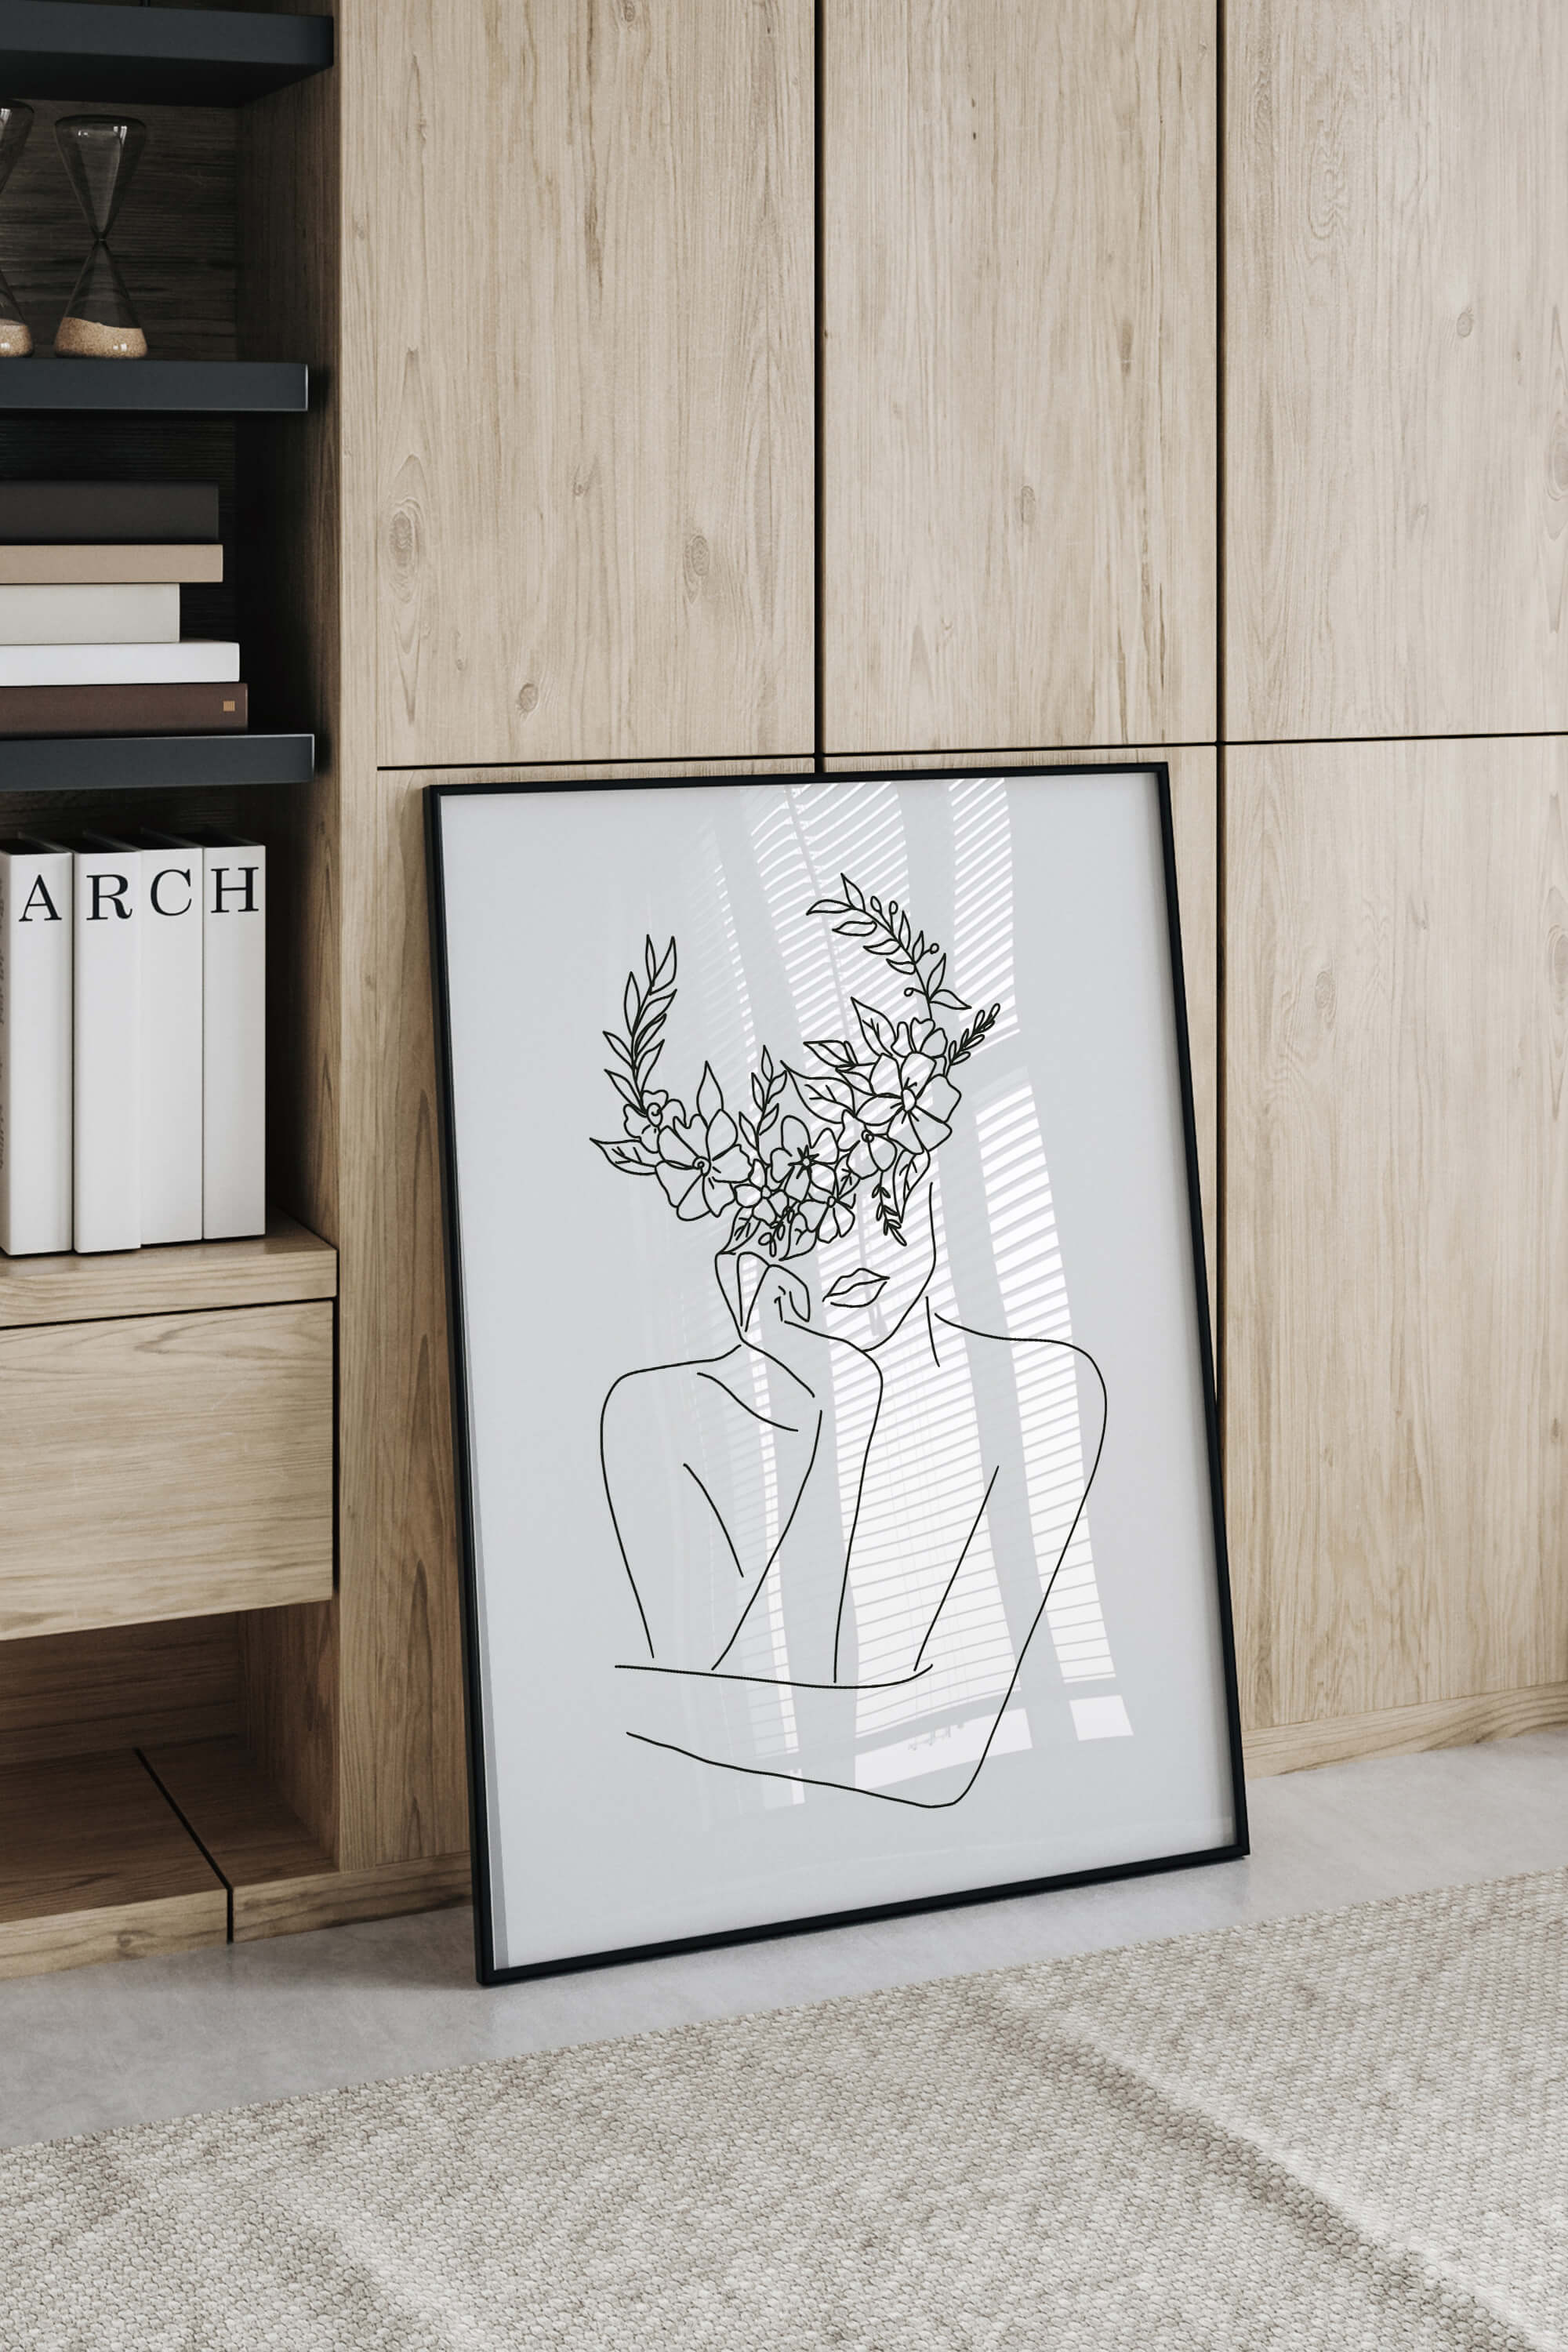 Monochrome illustration featuring captivating woman's face, blending elegance and timeless femininity. Limited edition art print to elevate your decor.